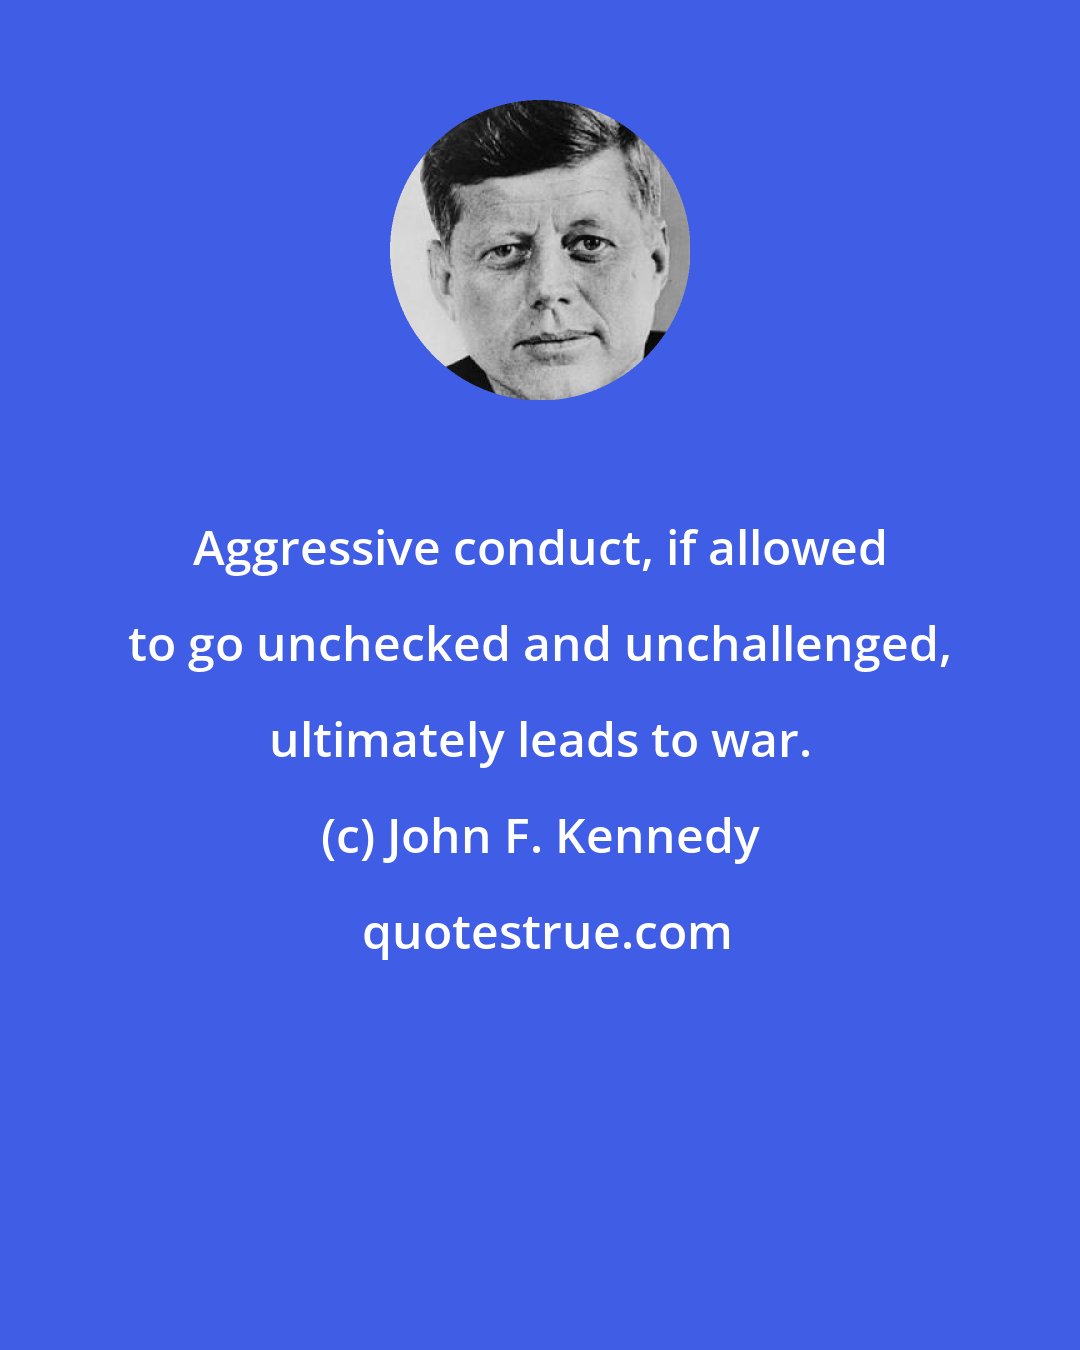 John F. Kennedy: Aggressive conduct, if allowed to go unchecked and unchallenged, ultimately leads to war.